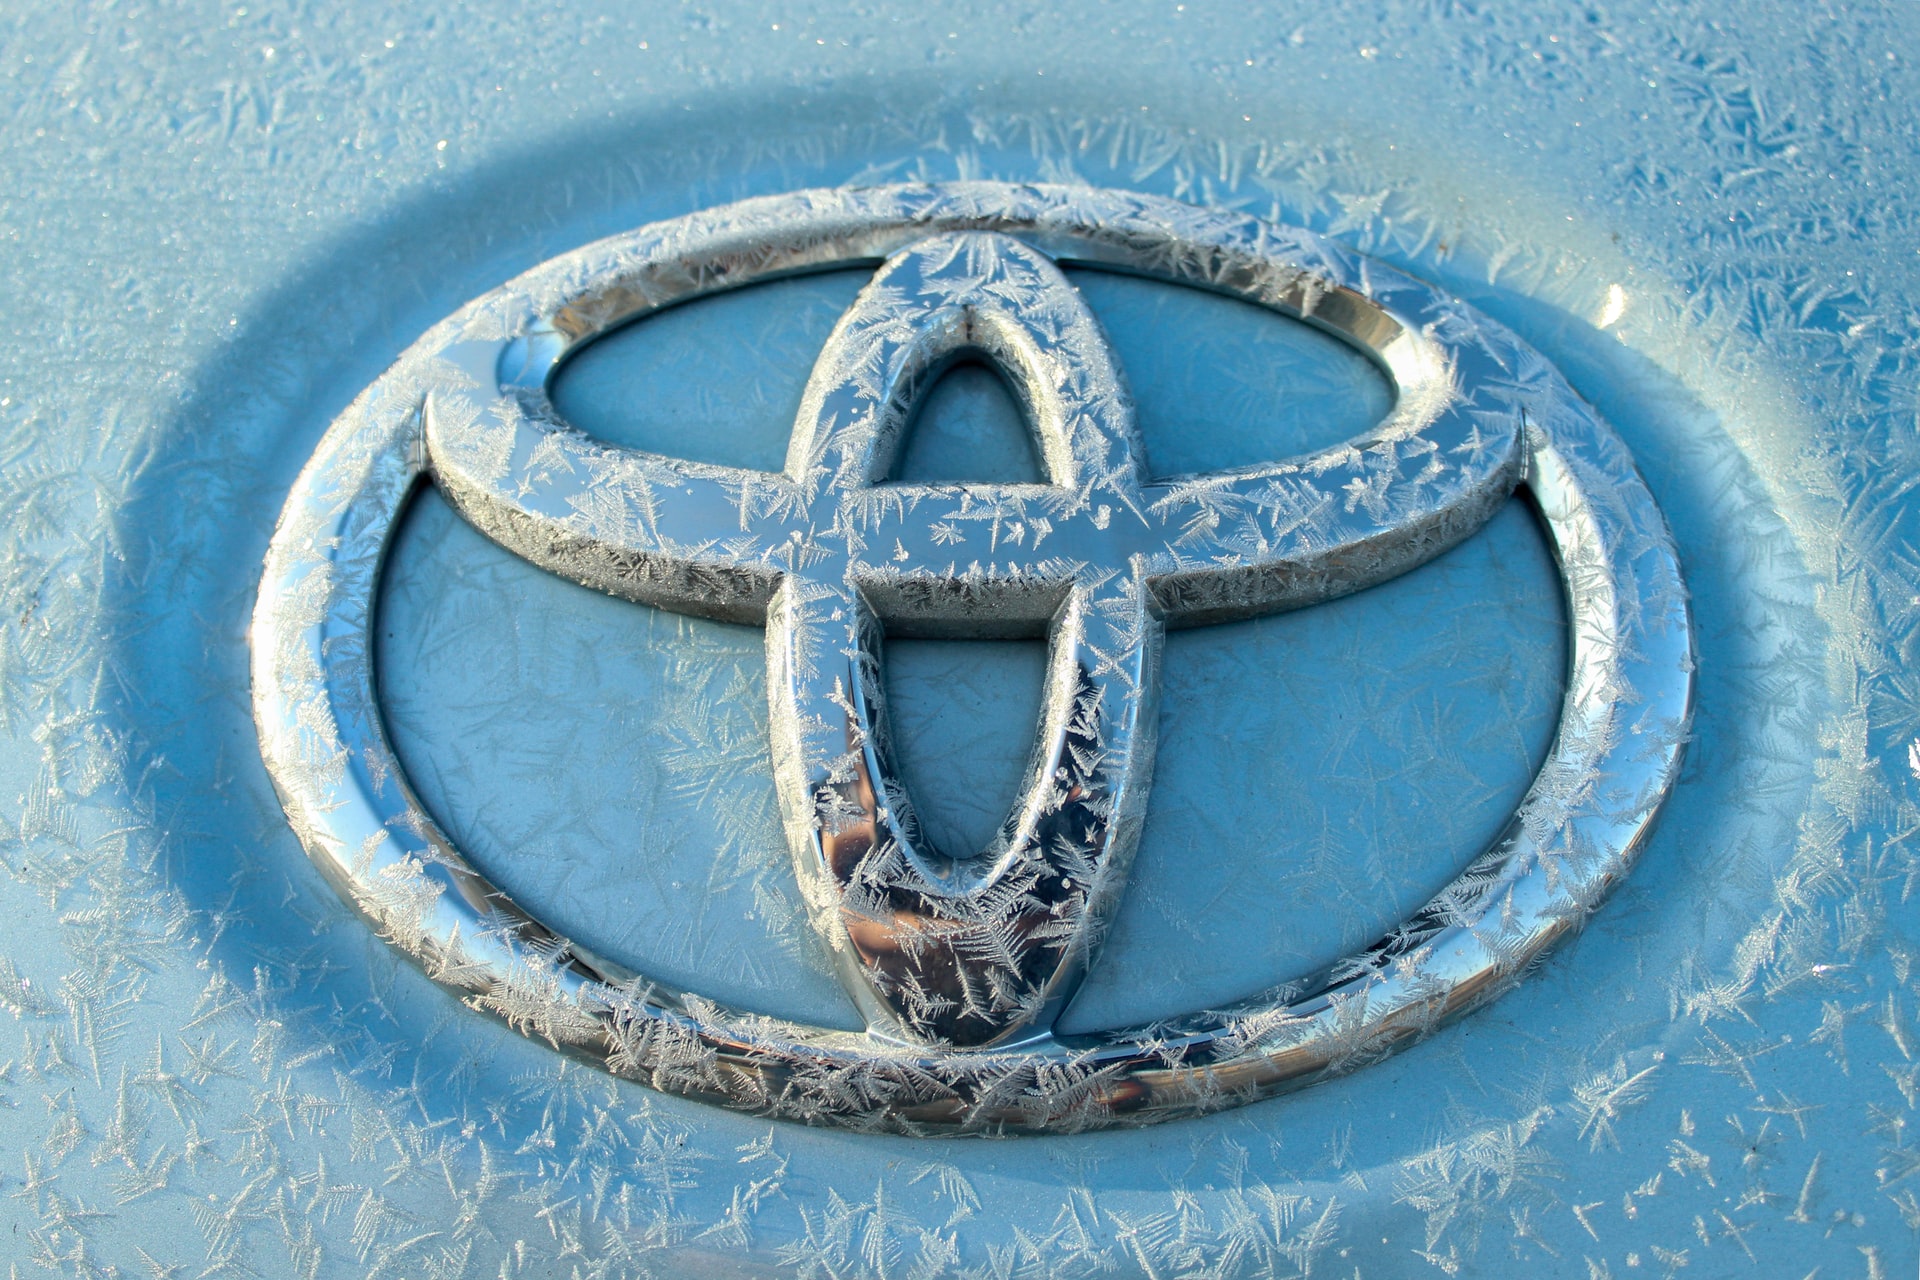 Toyota starts plans to launch its automotive operating software